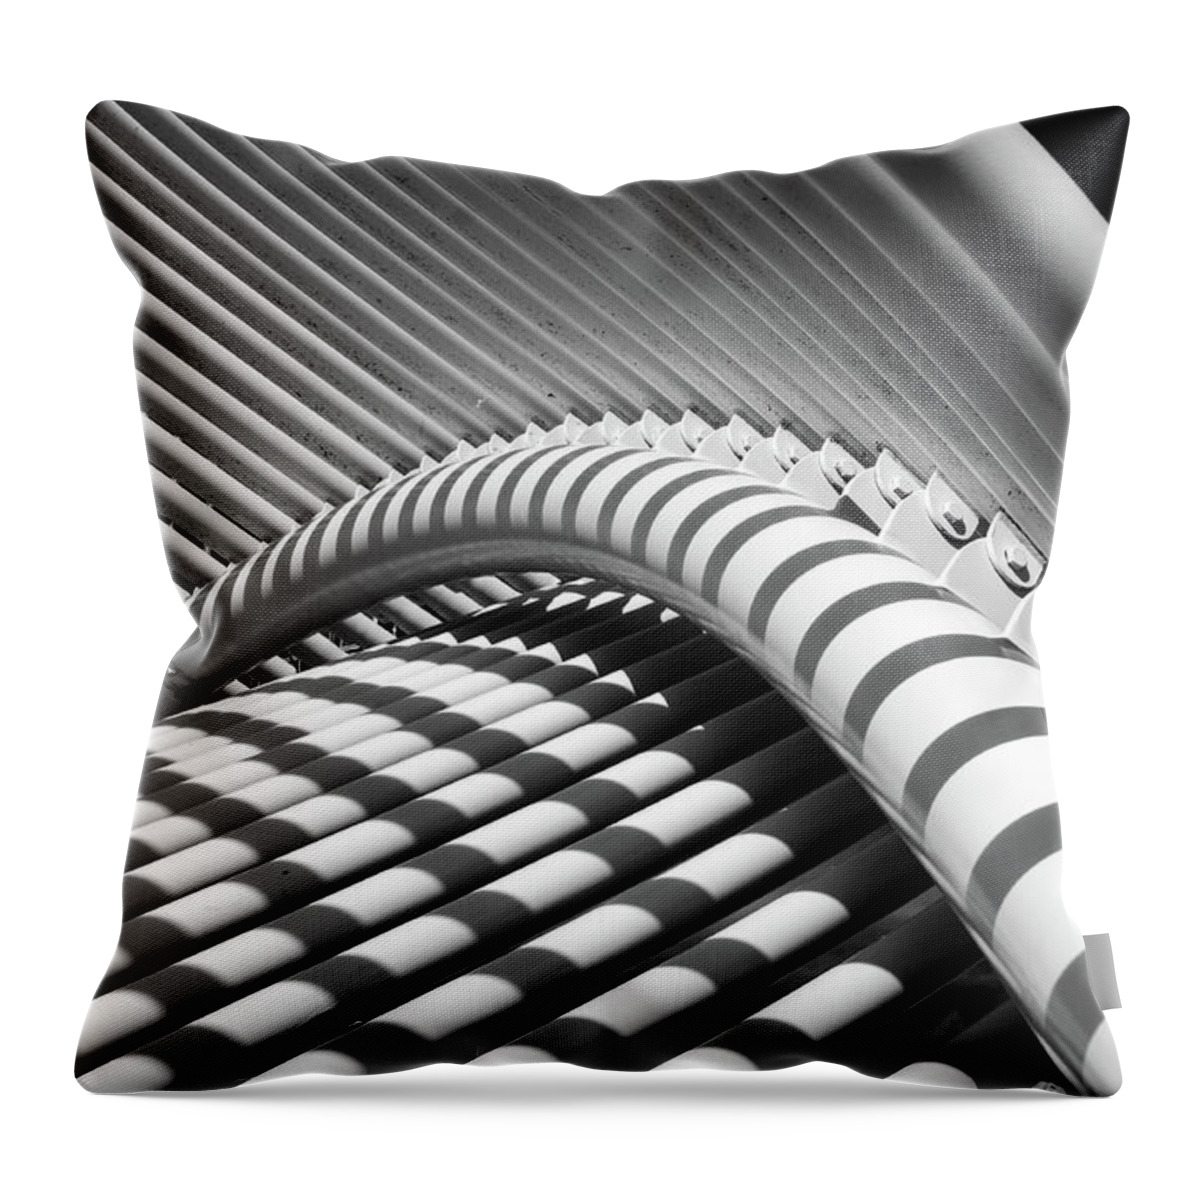 Abstract Throw Pillow featuring the photograph Myriad Garden Sculpture by James Barber